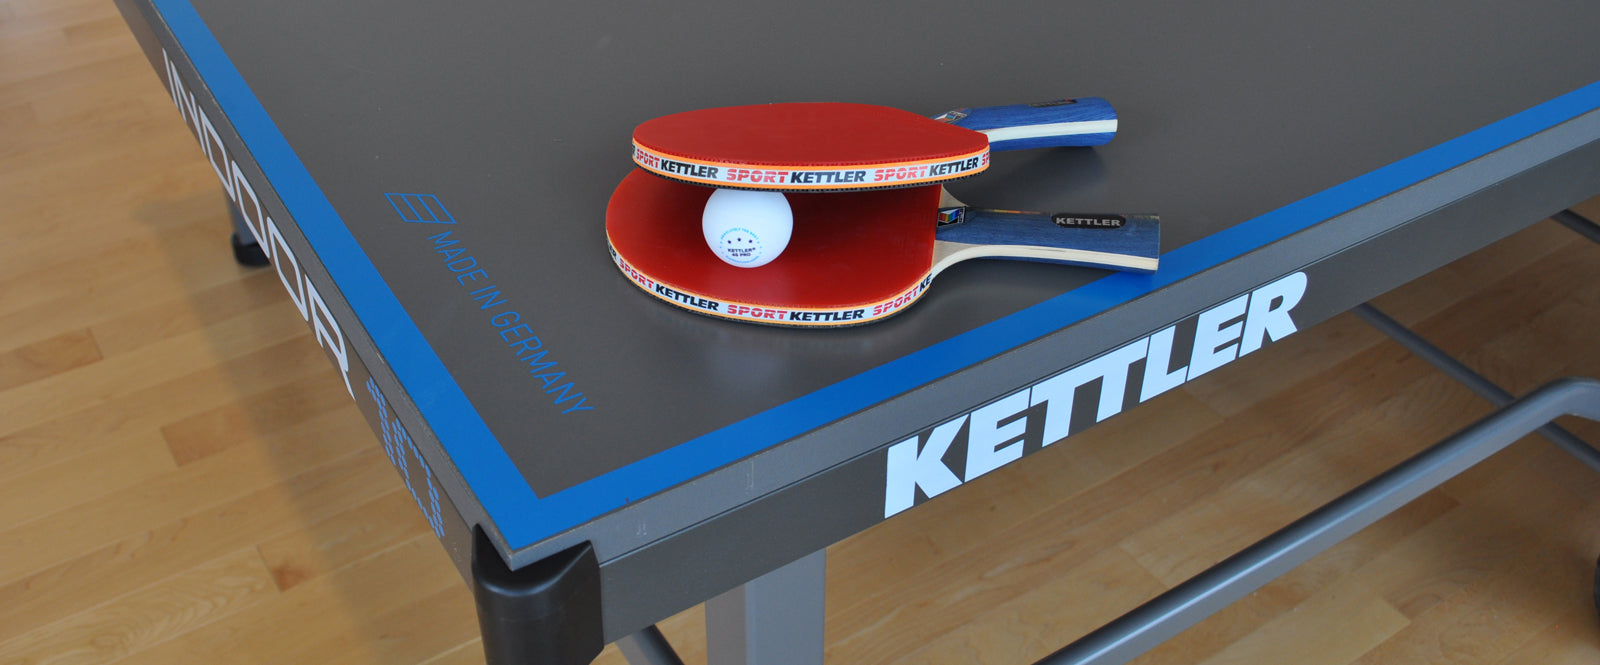 Table Tennis Accessories. Paddles and Ball sit on top of KETTLER Table Tennis Table.